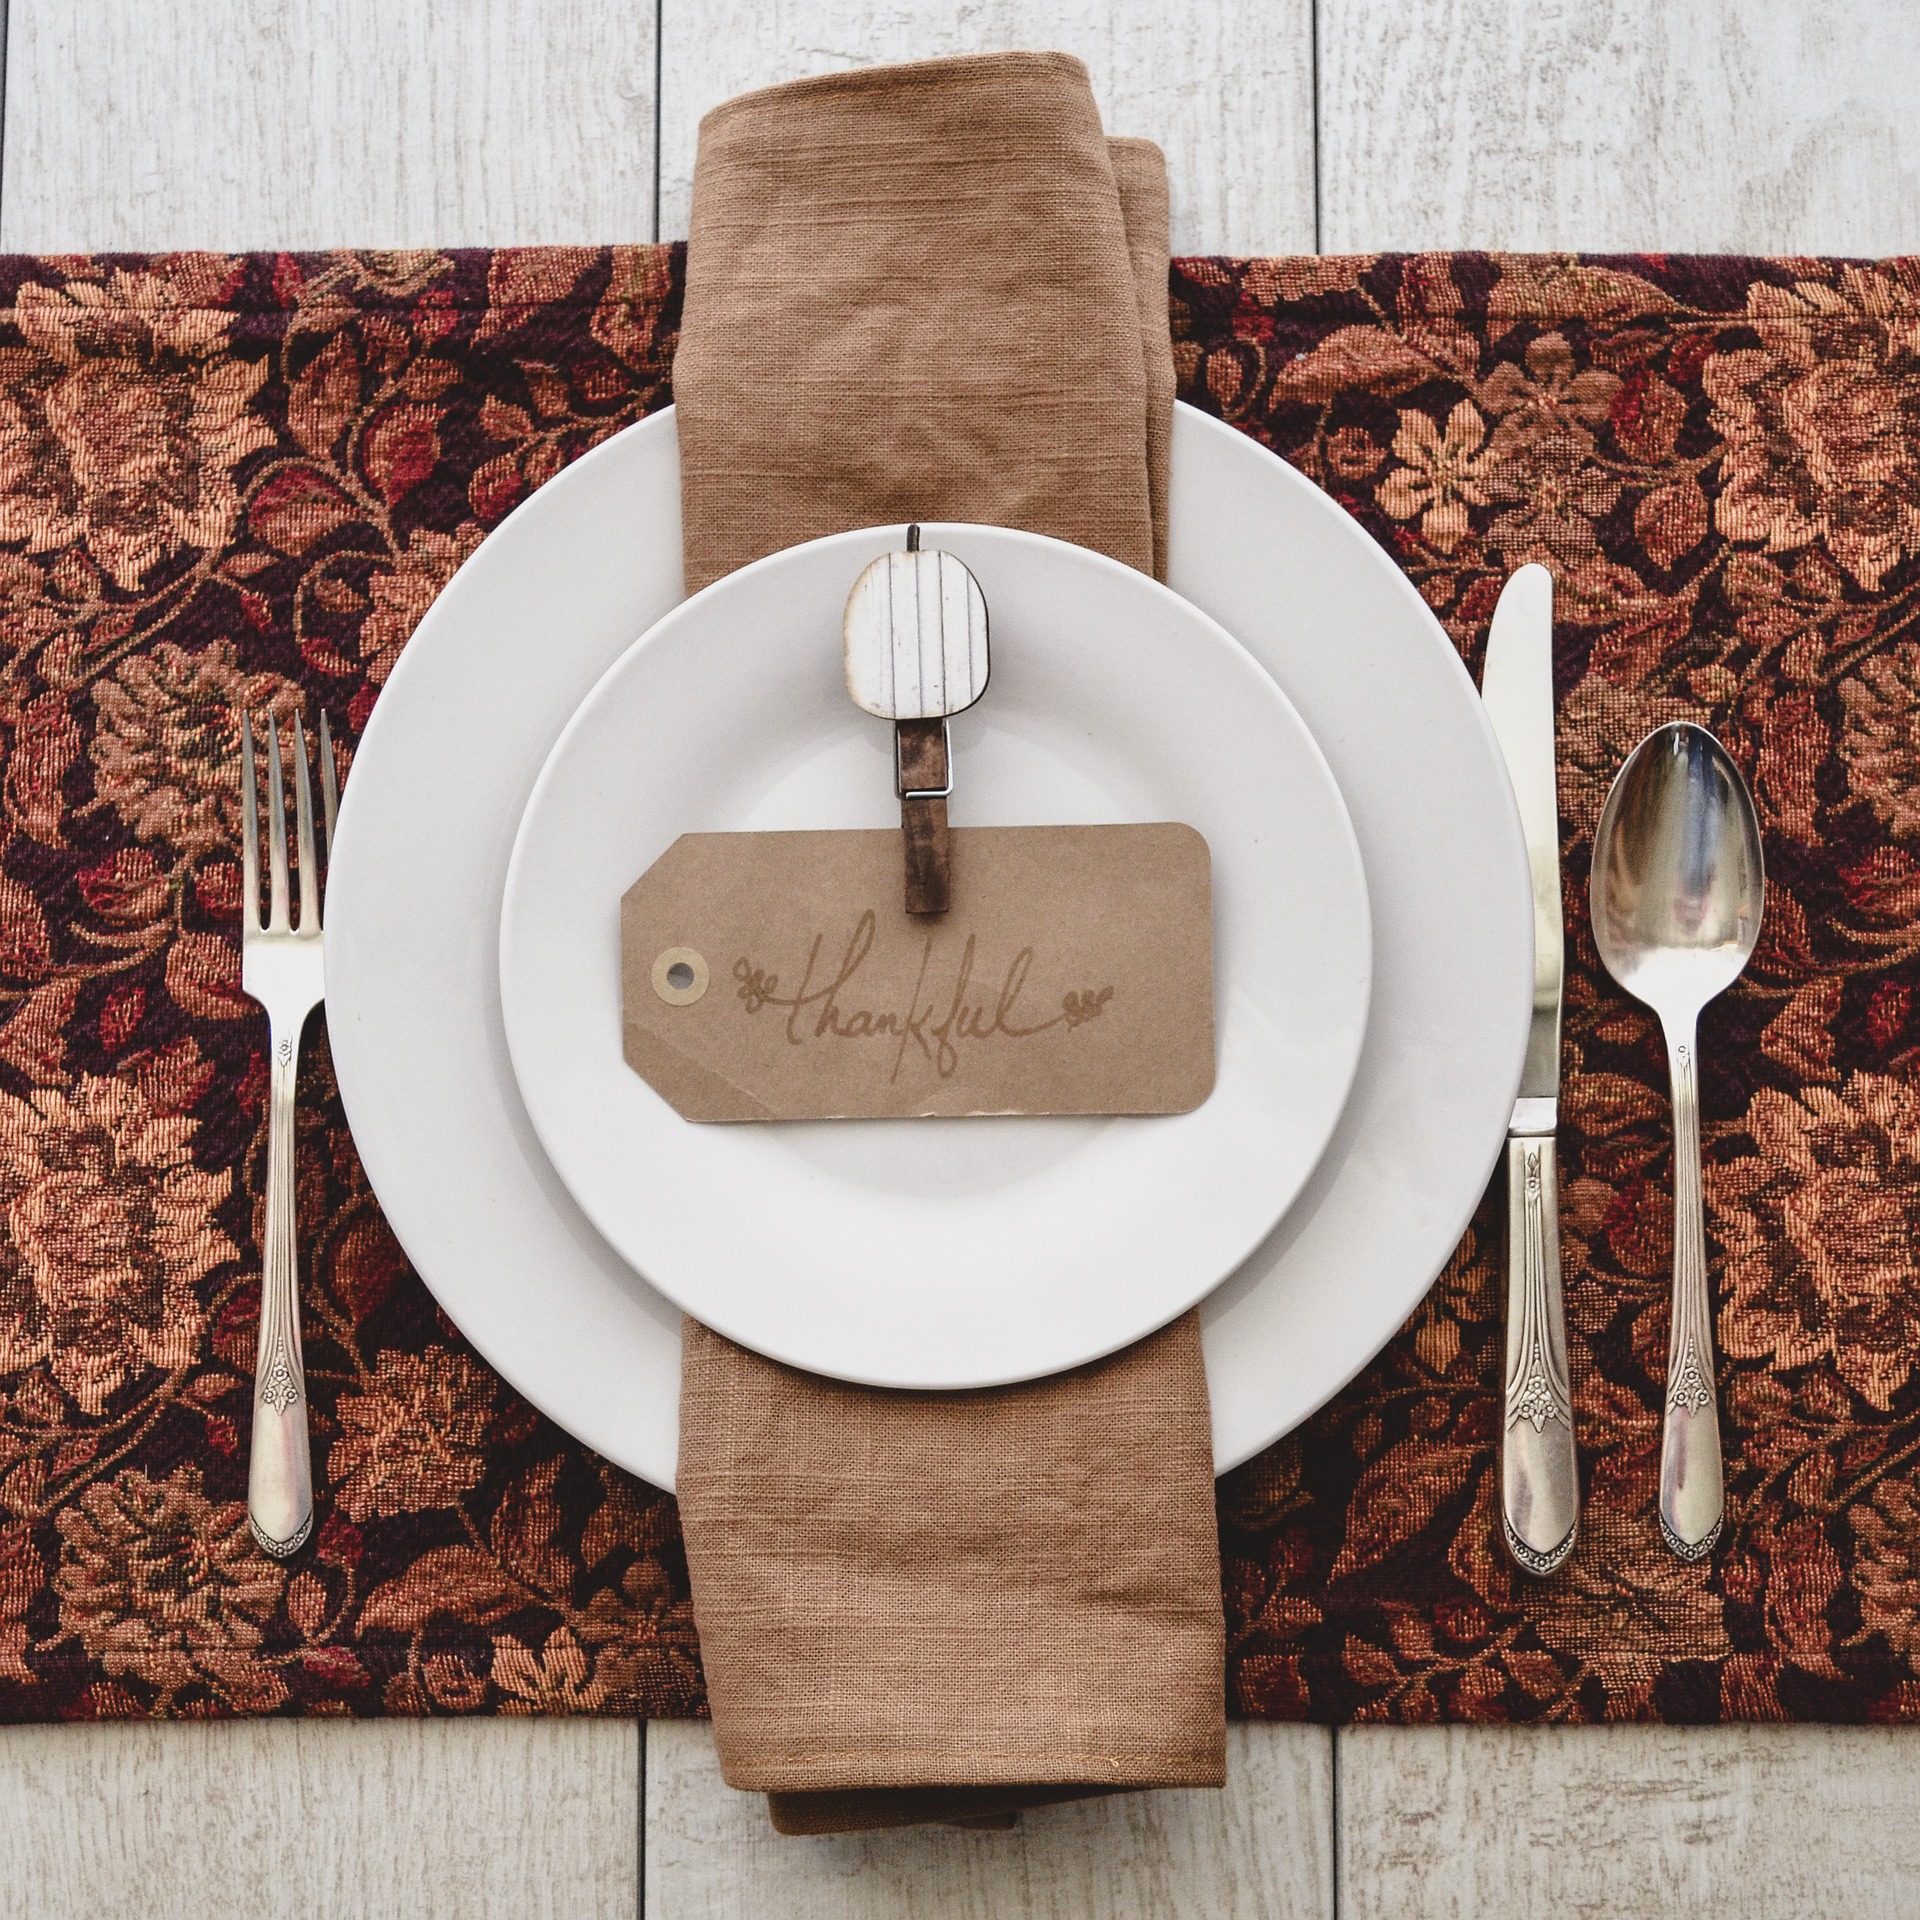 Effortless Thanksgiving Table Decor: Quick Tips for Last-Minute